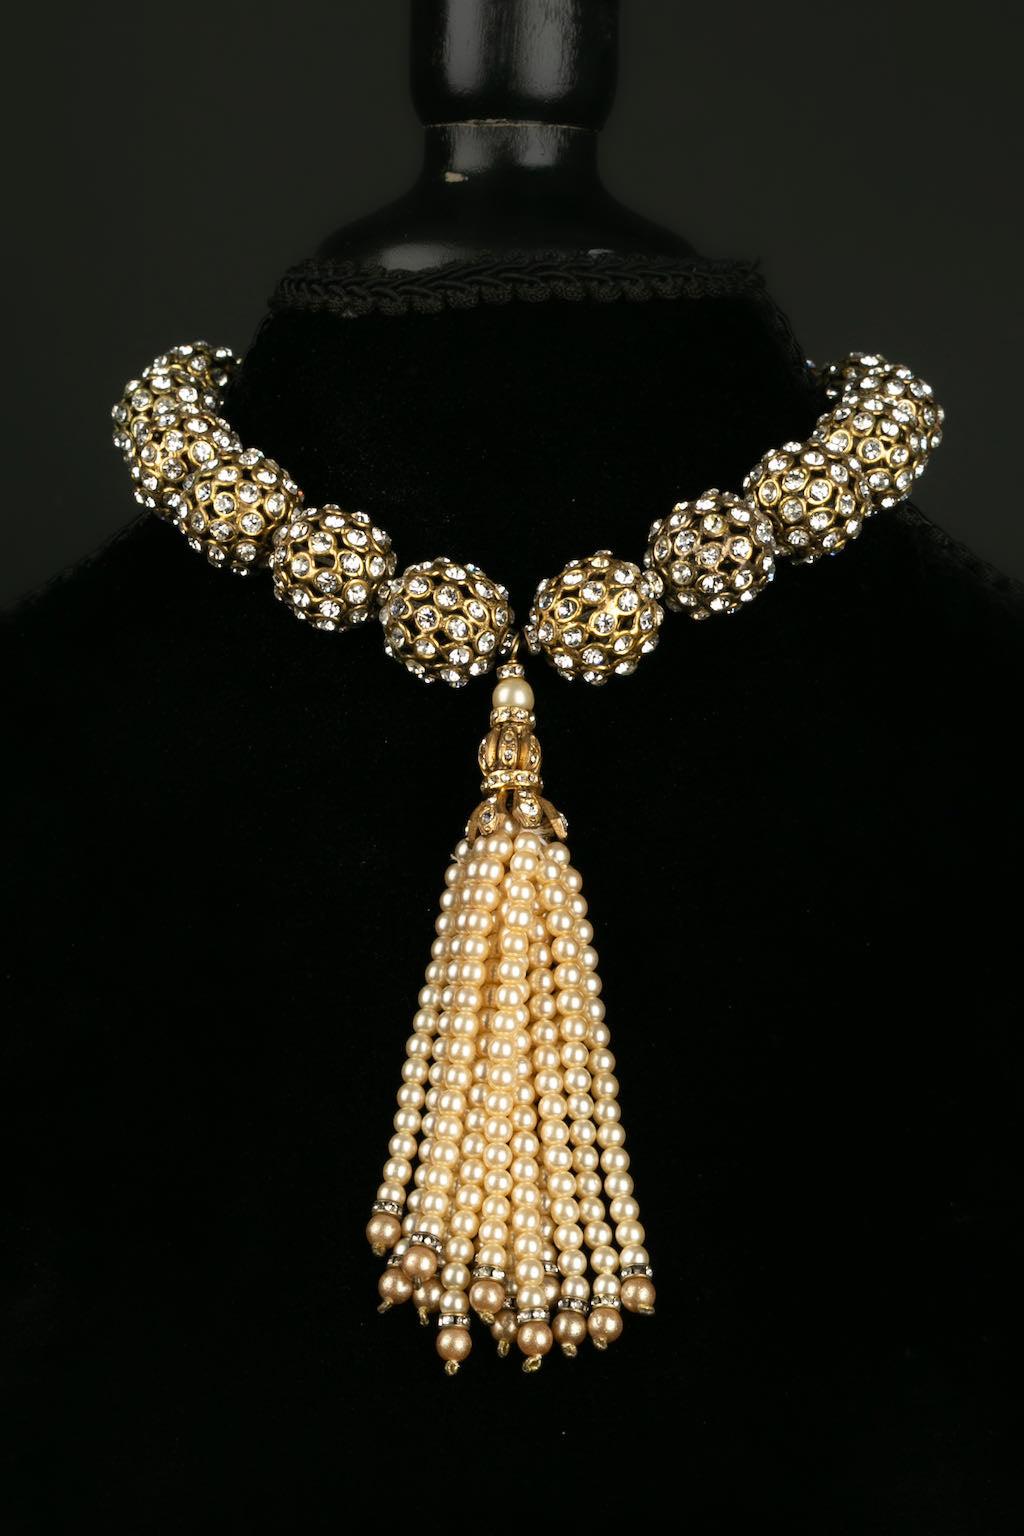 Chanel Short Necklace in Gold Metal Beads Paved with Rhinestones In Excellent Condition For Sale In SAINT-OUEN-SUR-SEINE, FR